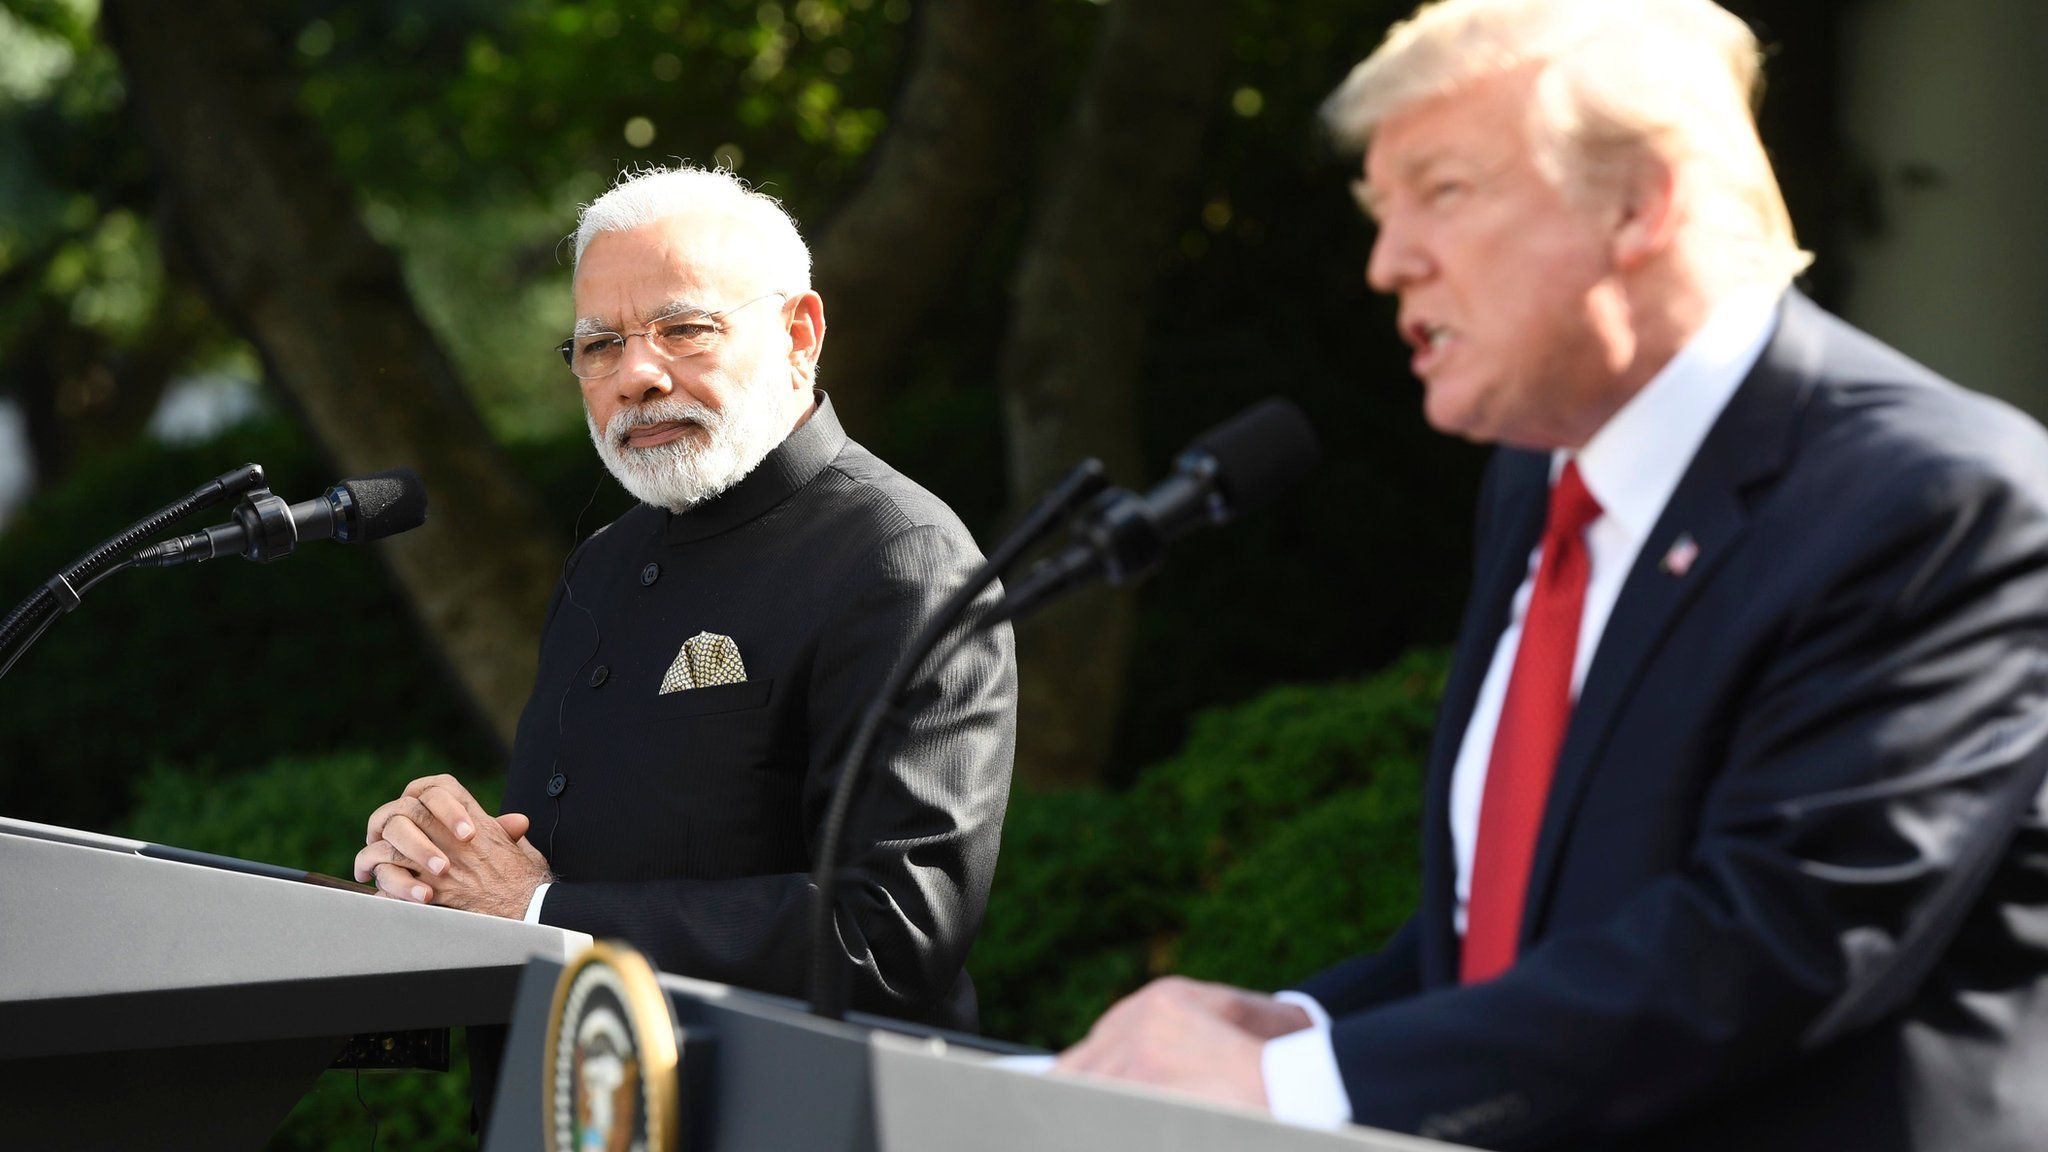 President Donald Trump and Indian Prime Minister Narendra Modi after their meeting in the Oval Office of the White House in Washington, June 26, 2017